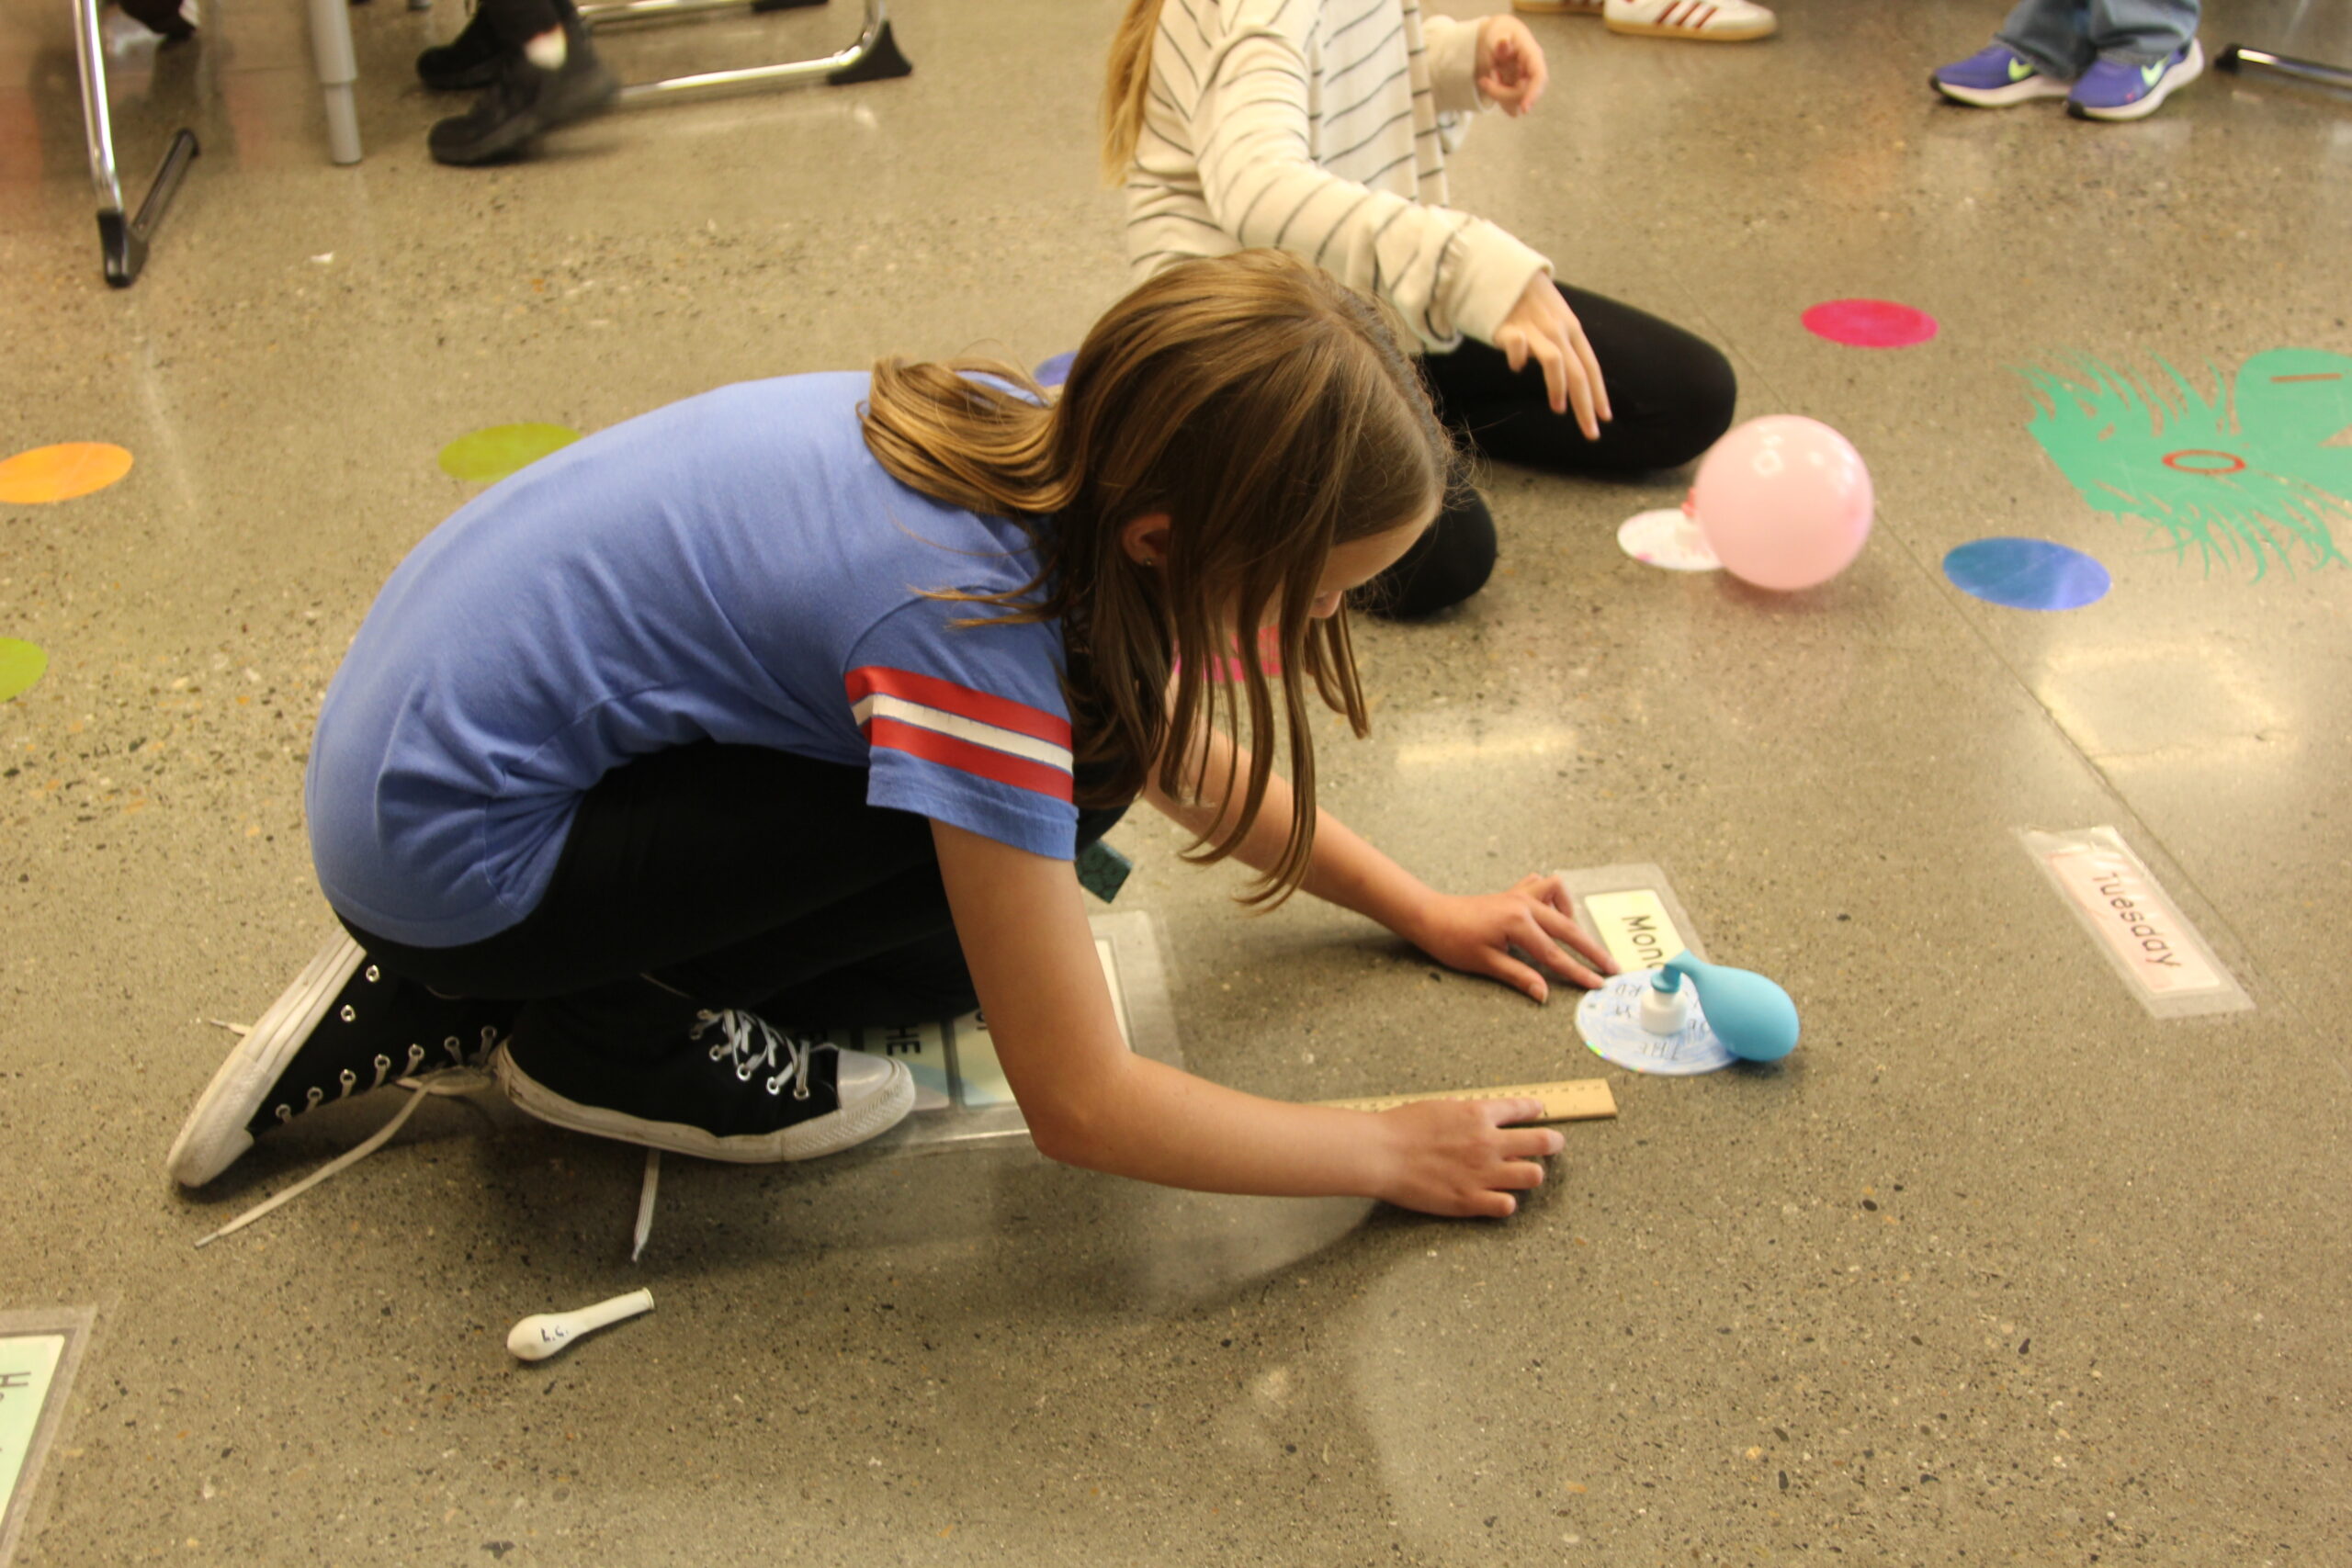 Student measures distance traveled by balloon powered hovercraft